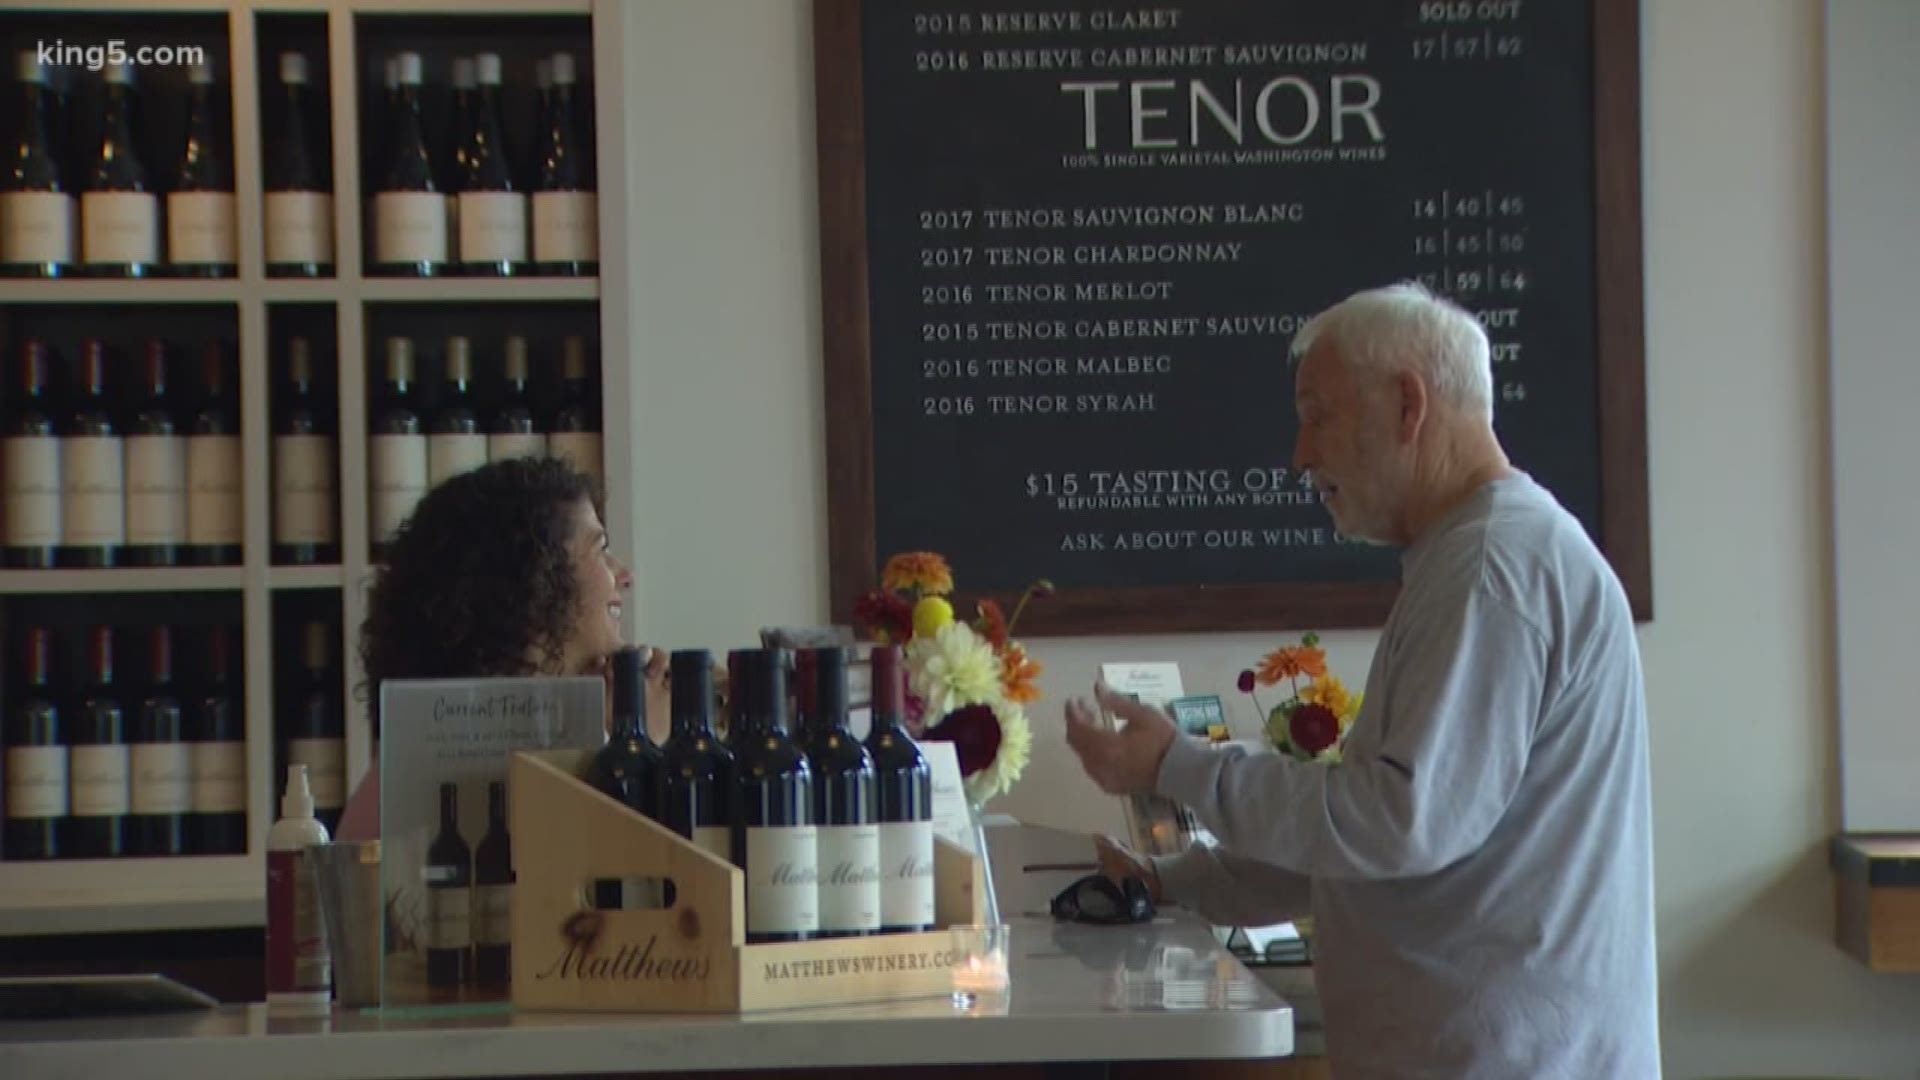 The ordinance would prohibit tasting rooms on a site that does not also make wine or beer. KING 5's Natalie Swaby reports.